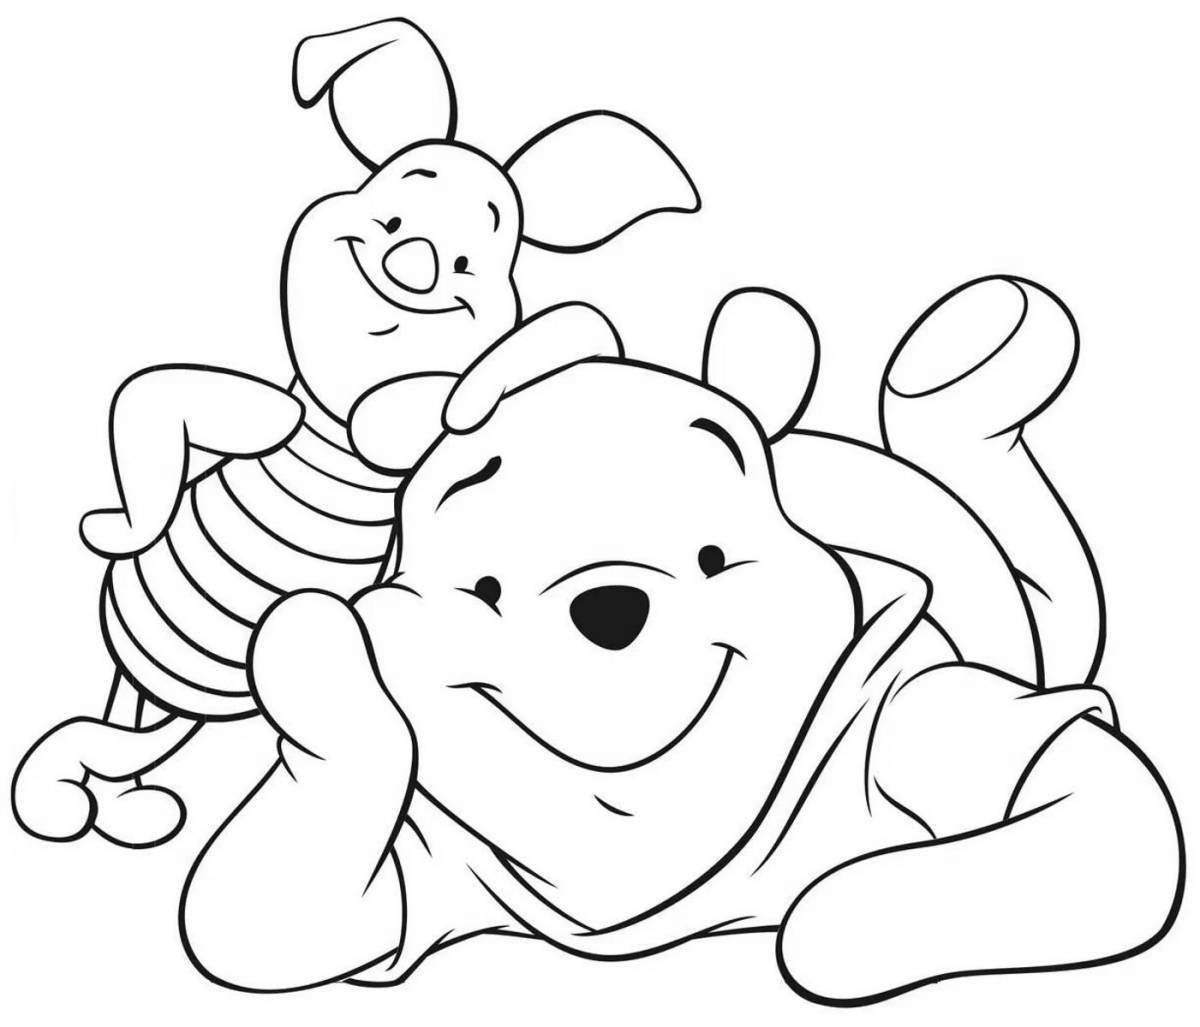 Winnie the Pooh and friends funny coloring book